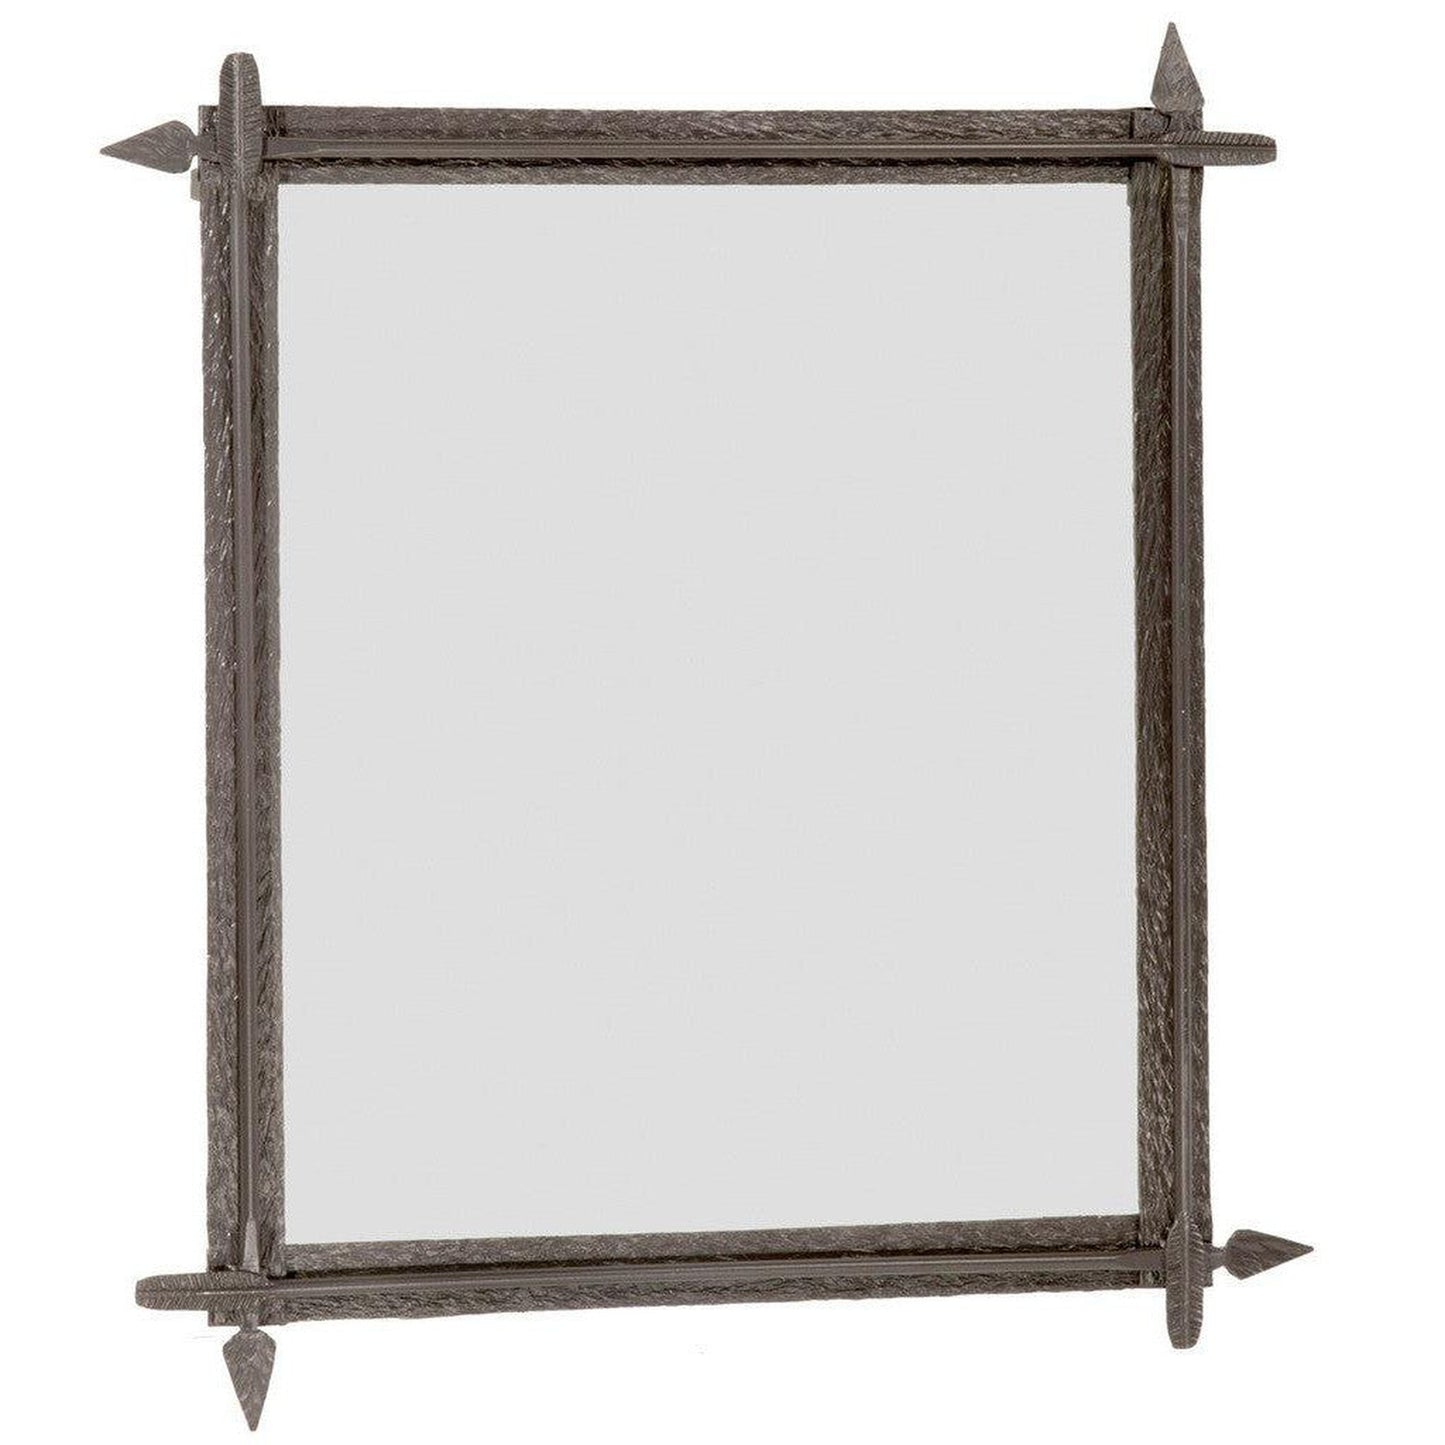 Stone County Ironworks Quapaw 31" x 43" Large Burnished Gold Iron Wall Mirror With Pewter Iron Accent